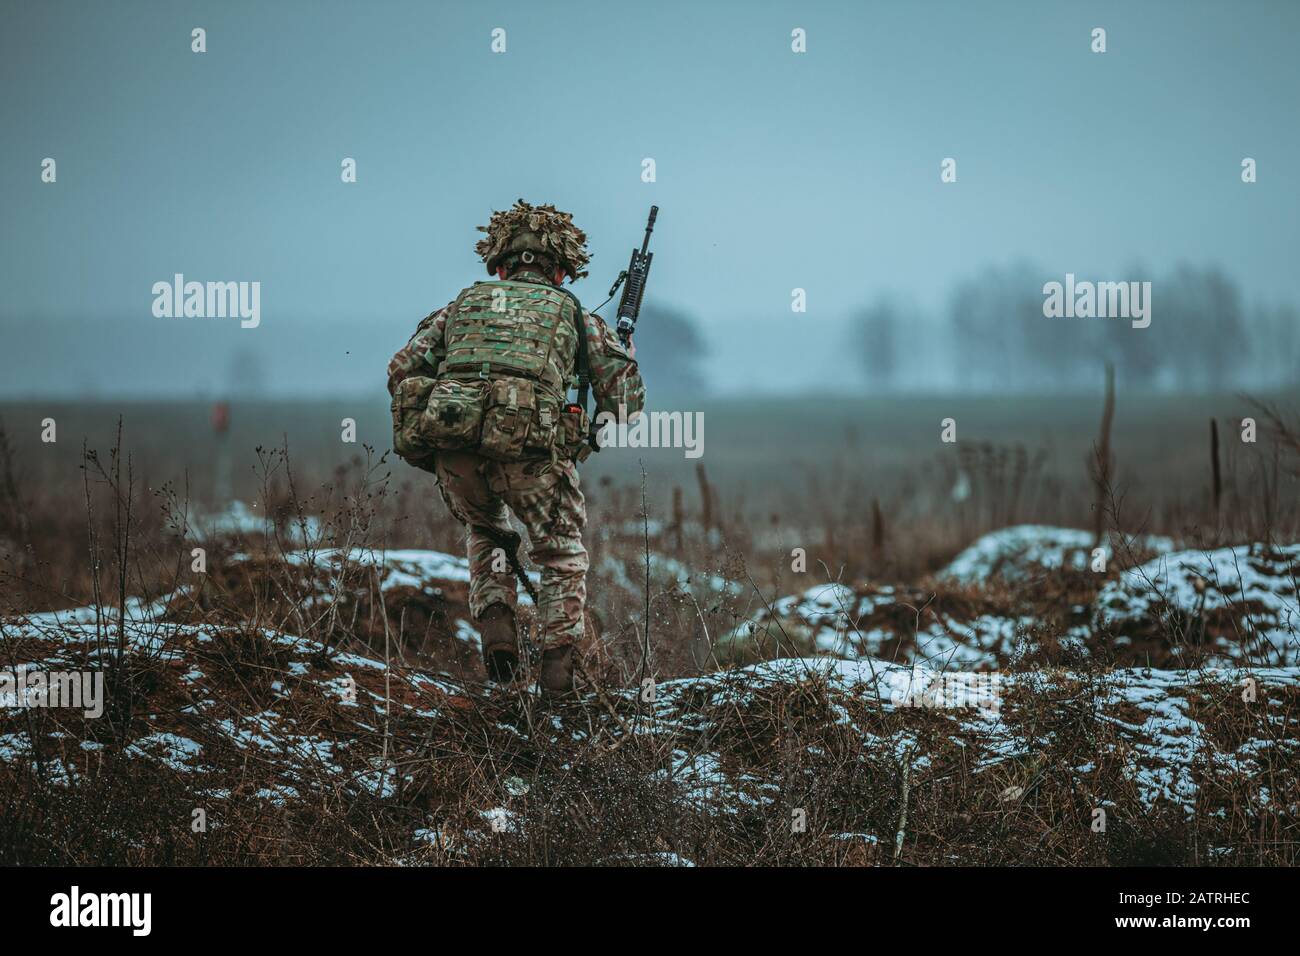 Bemowo Piskie, Poland. 04th Feb, 2020. A British Soldier, assigned to the Royal Scots Dragoon Guards, runs for cover during a NATO live-fire exercise February 4, 2020 in Bemowo Piskie, Poland. Credit: Sgt. Timothy Hamlin/Planetpix/Alamy Live News Credit: Planetpix/Alamy Live News Stock Photo